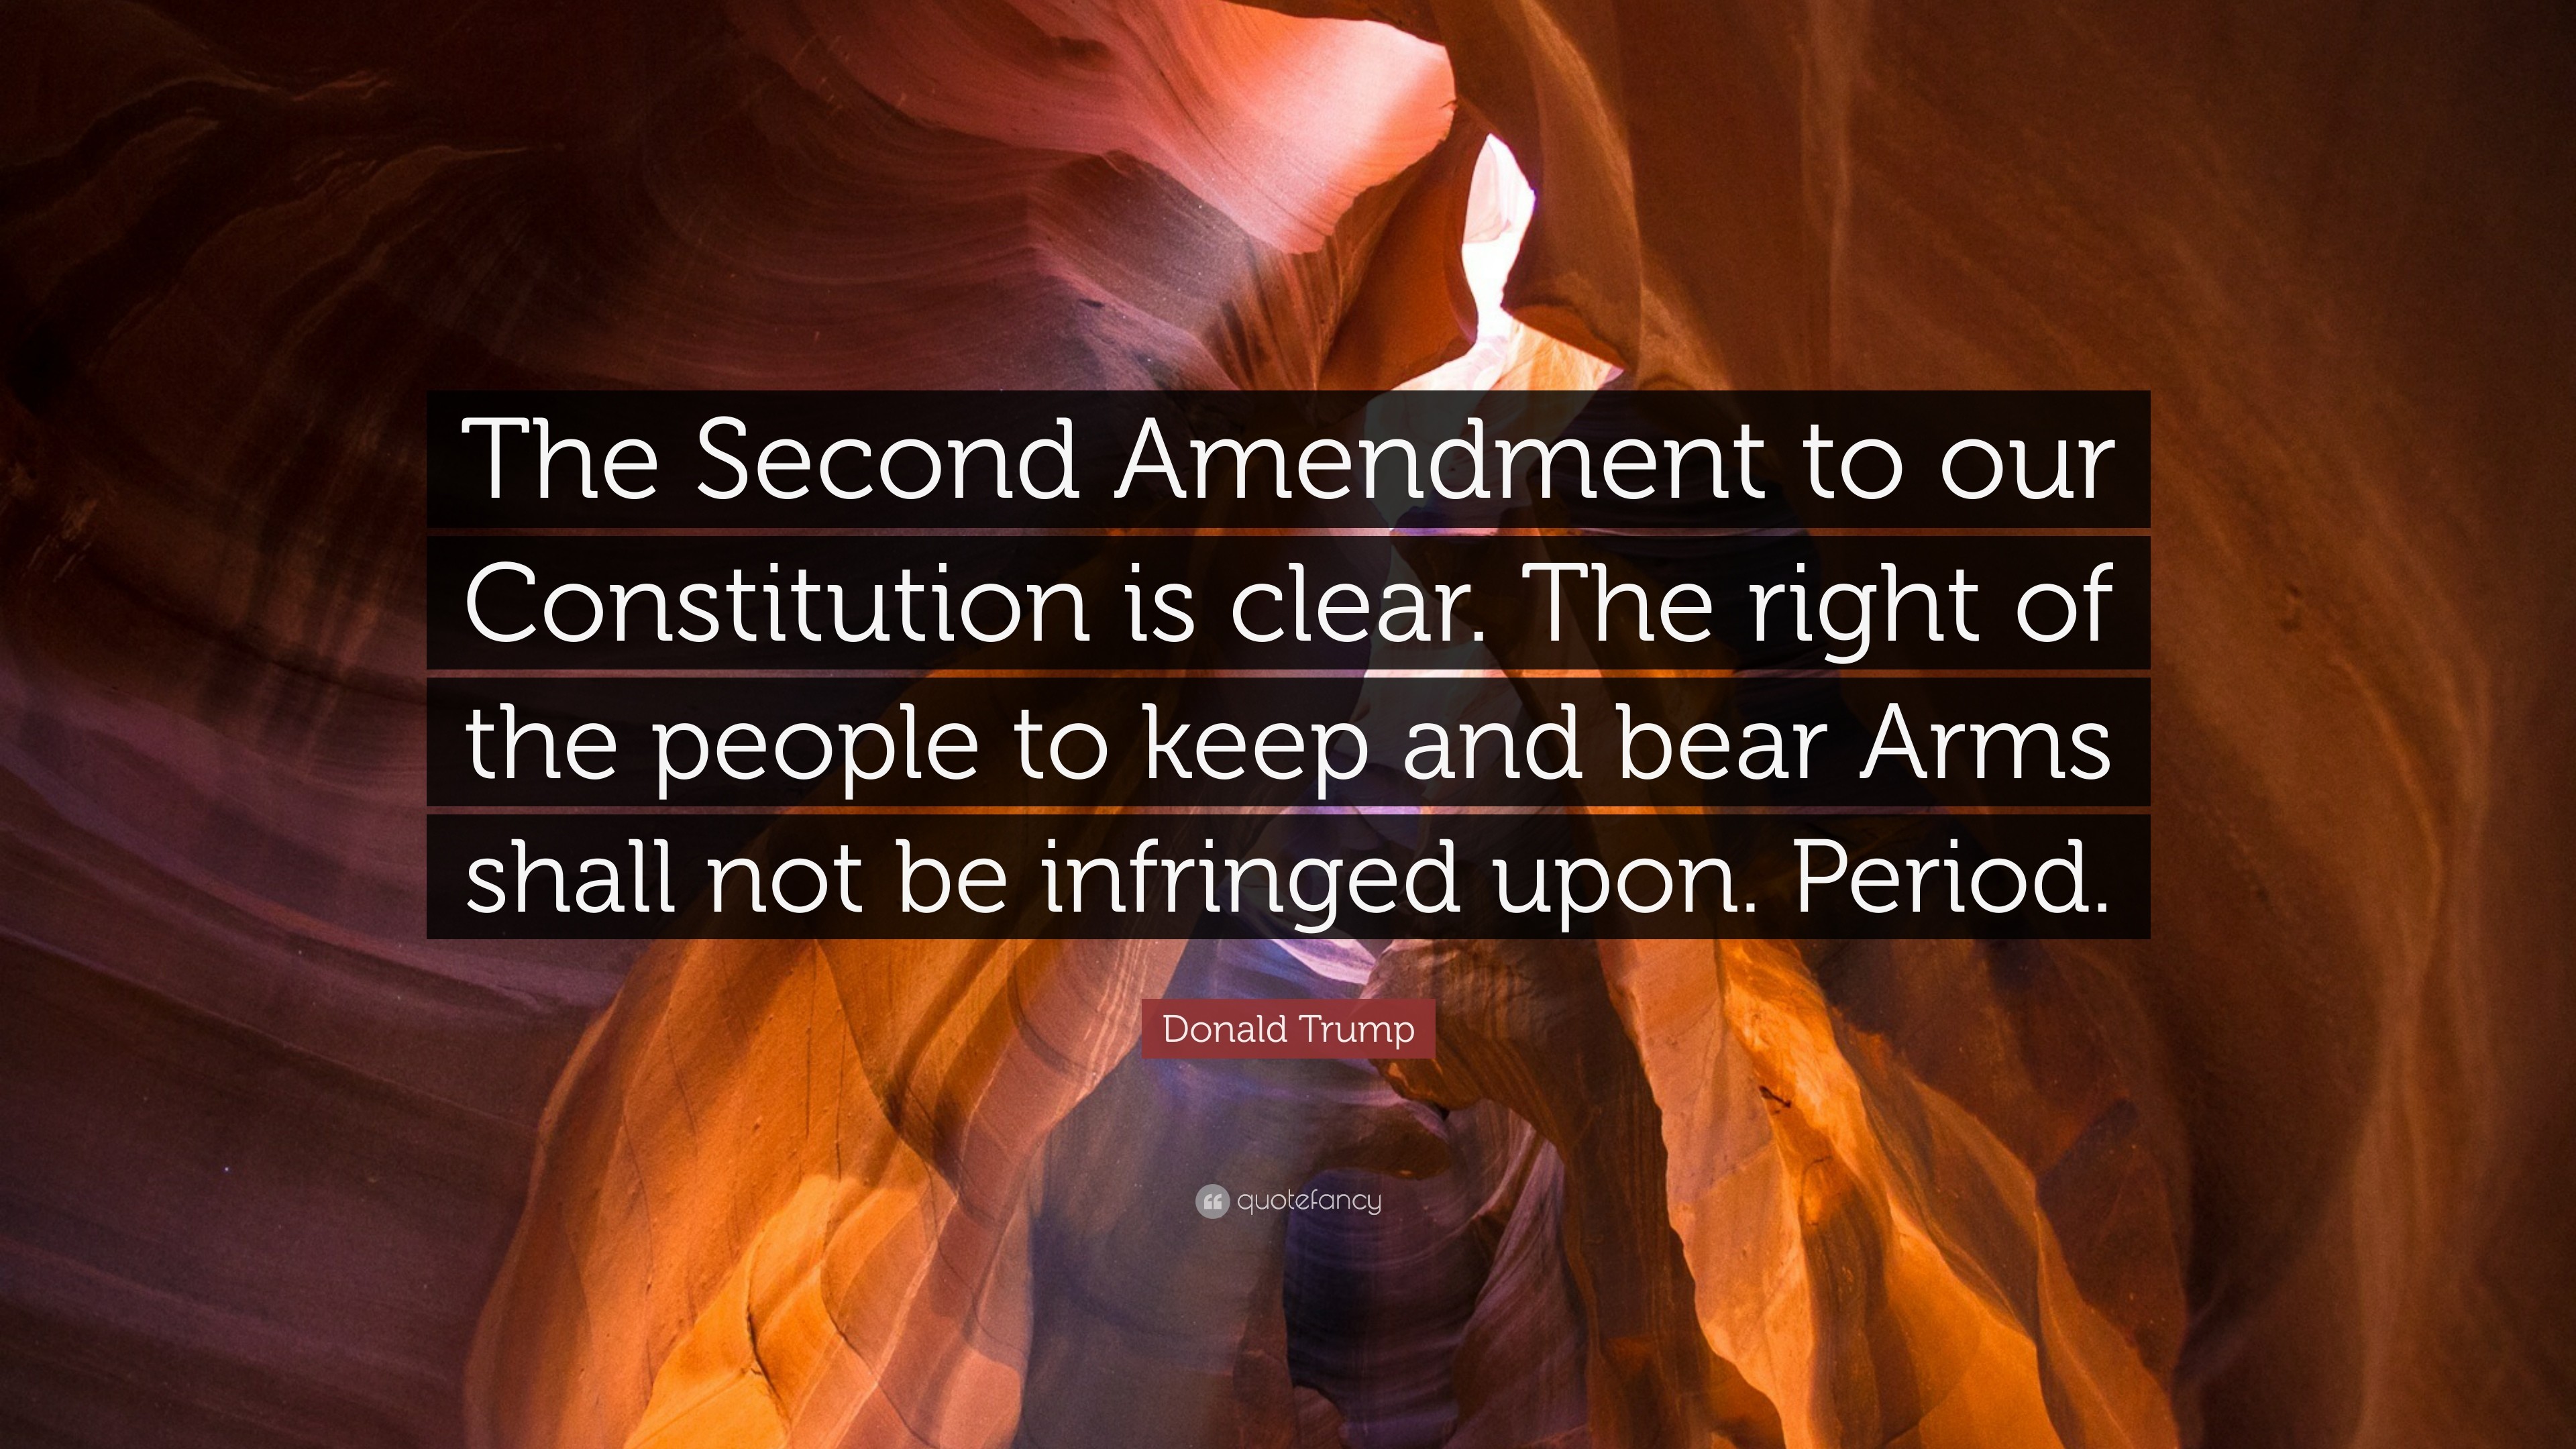 3840x2160 Donald Trump Quote: “The Second Amendment to our Constitution is clear. The  right